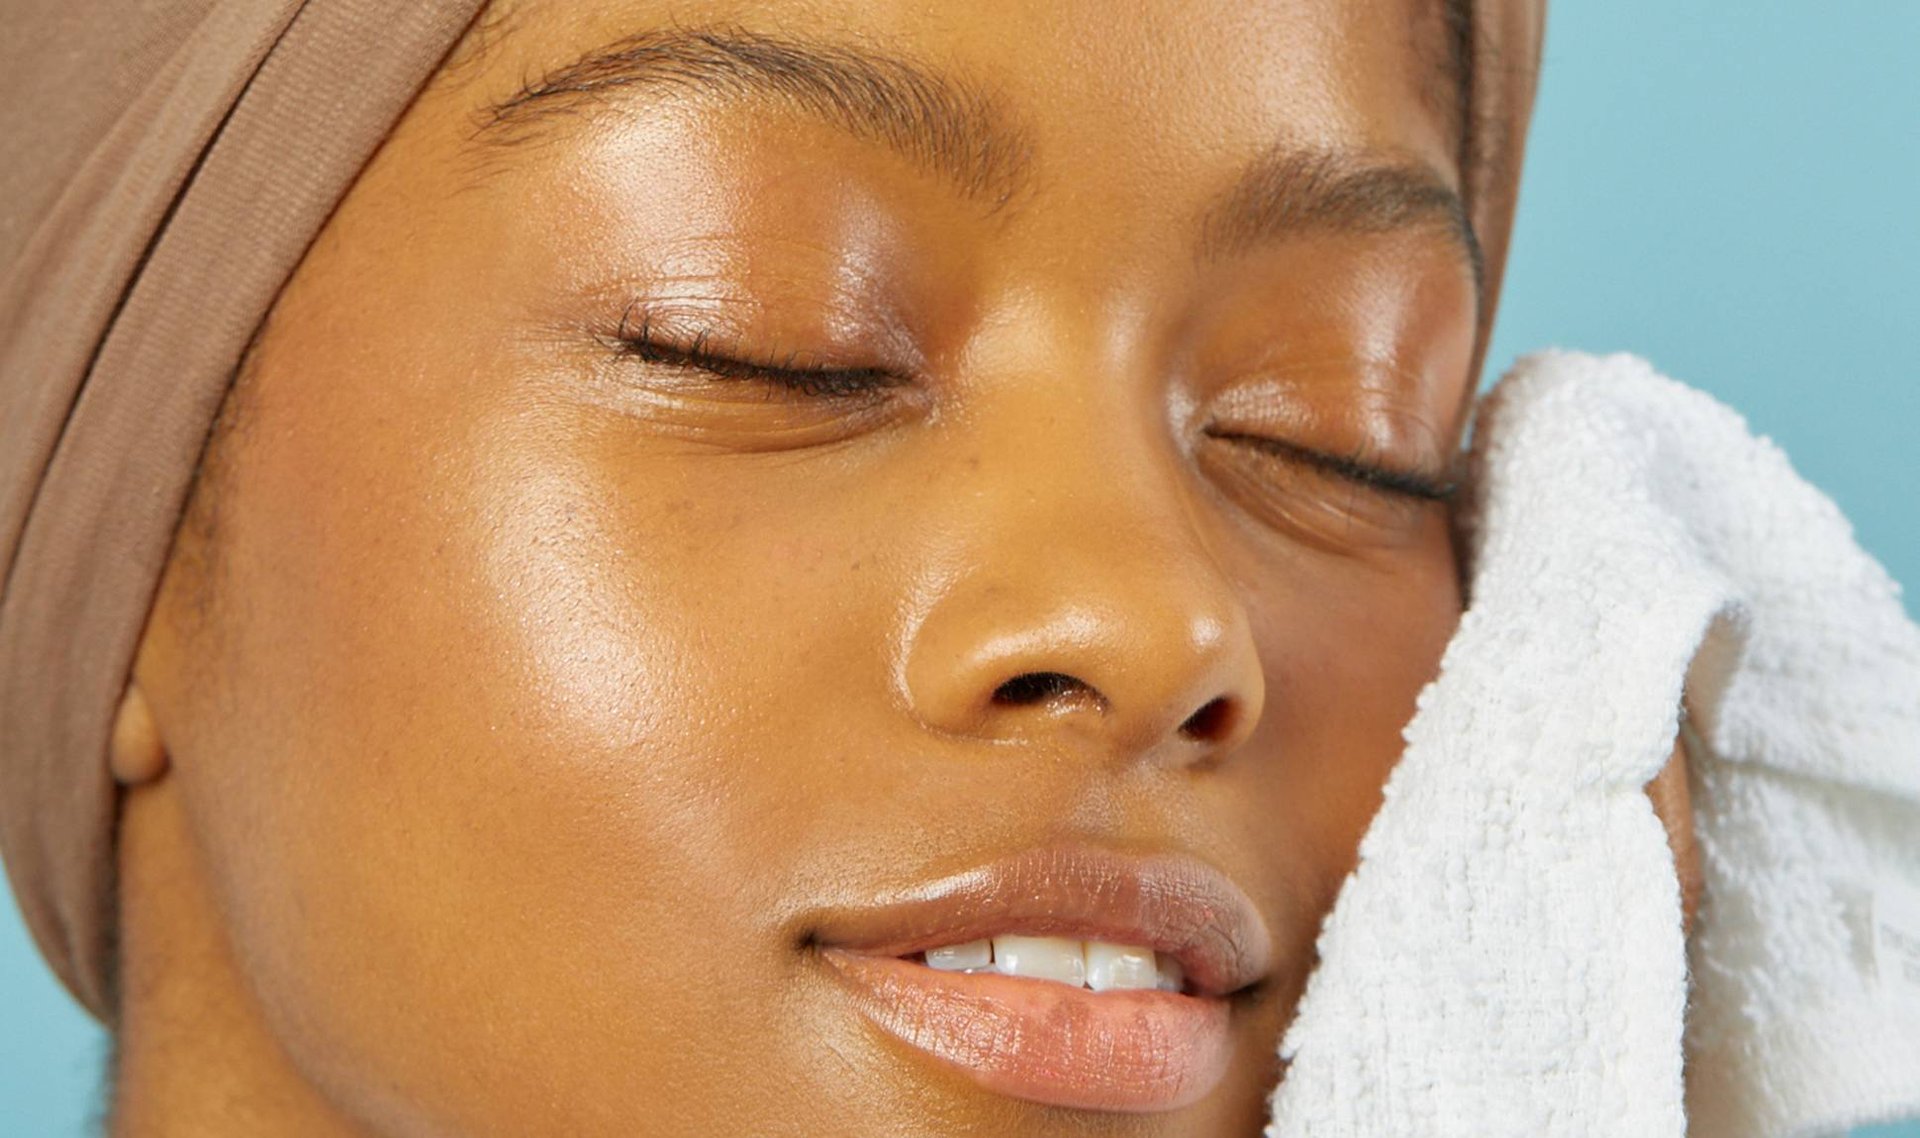 Quiz: What’s the Best Cleanser for Your Skin Type?